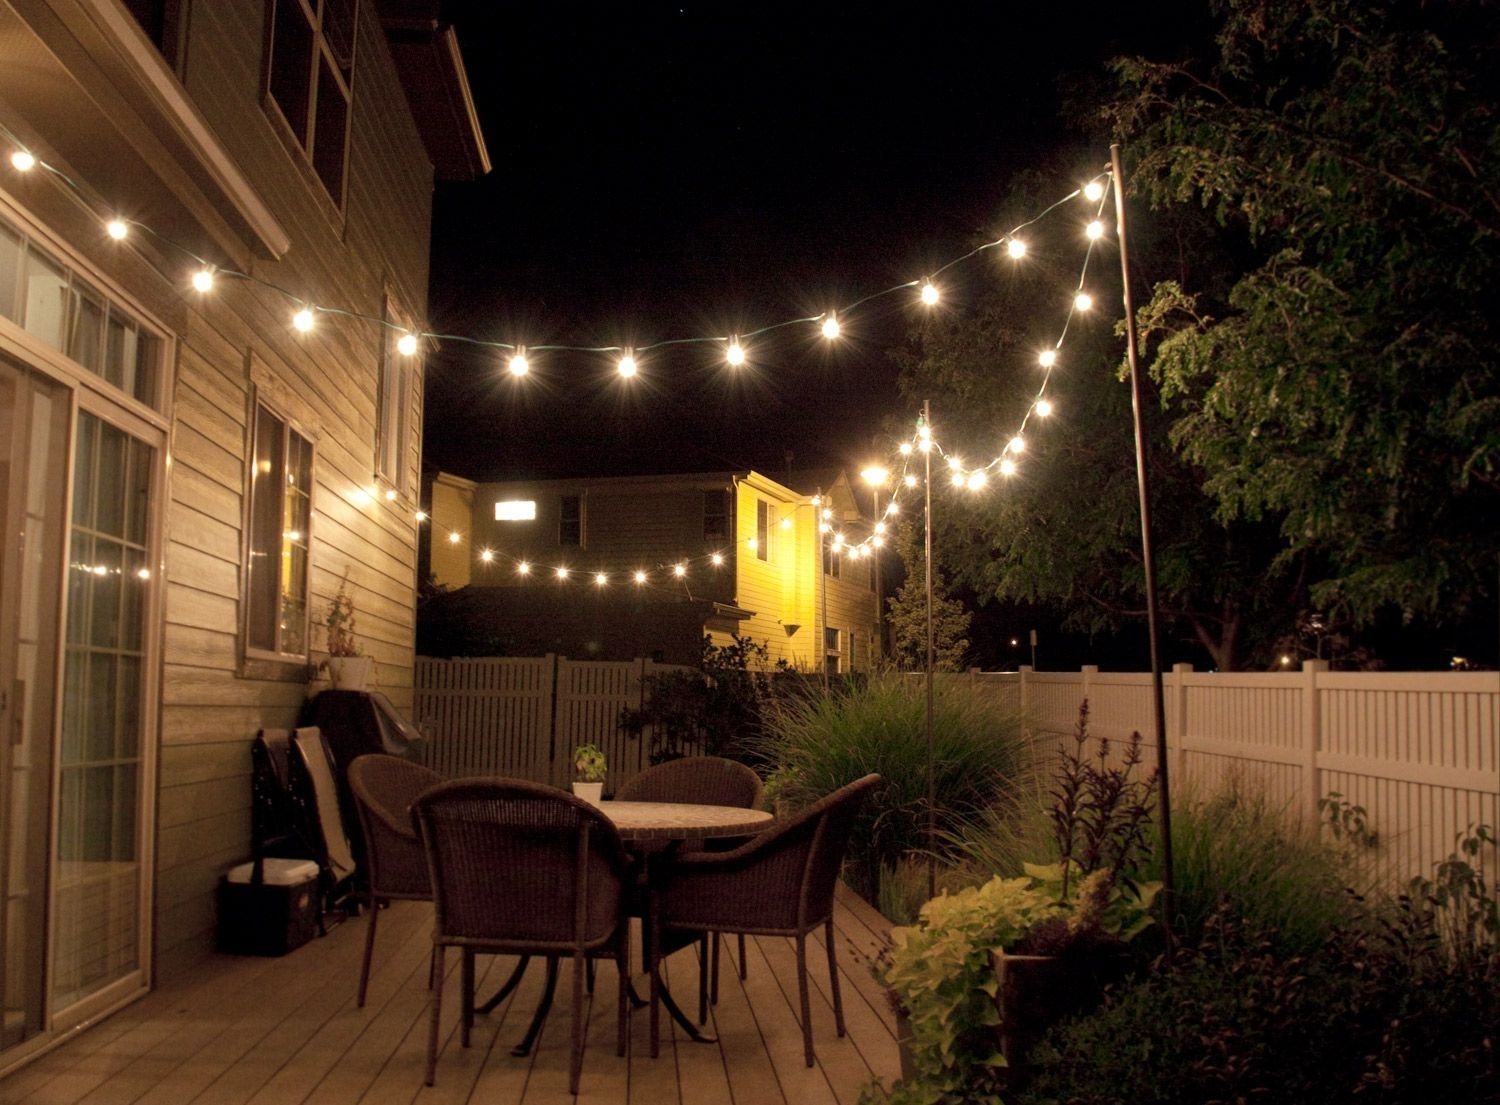 How To Make Inexpensive Poles To Hang String Lights On – Café Style Intended For Hanging Outdoor Security Lights (View 11 of 15)